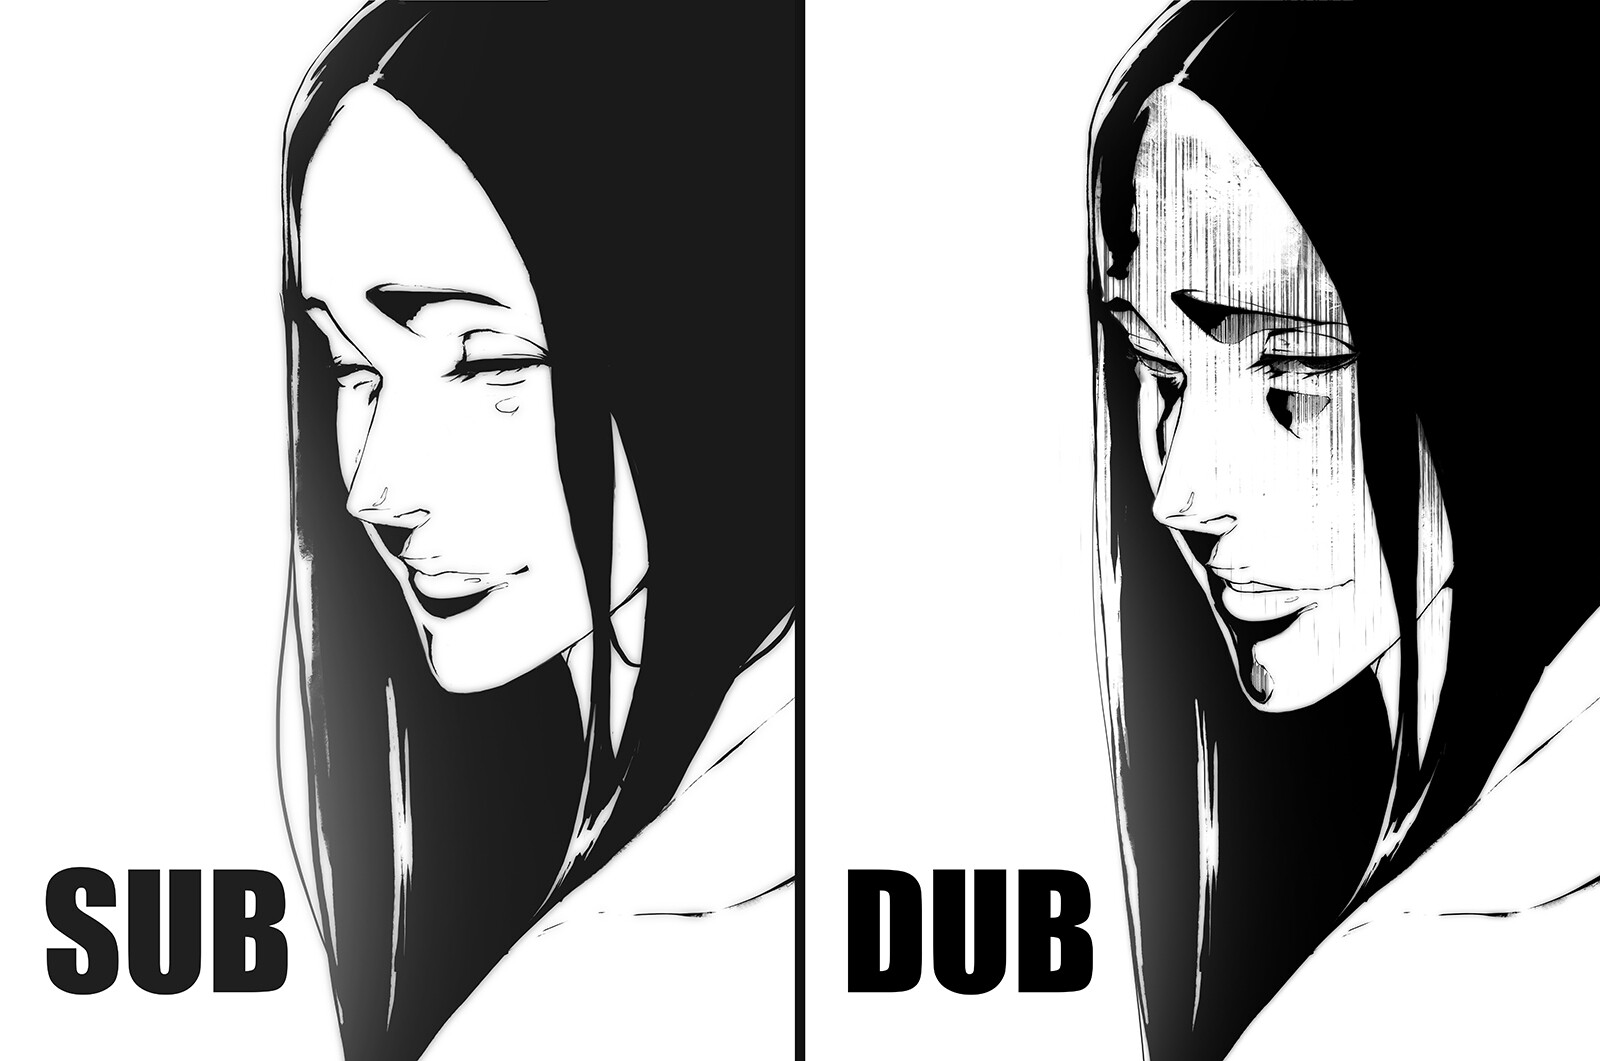 Dub, not even once.